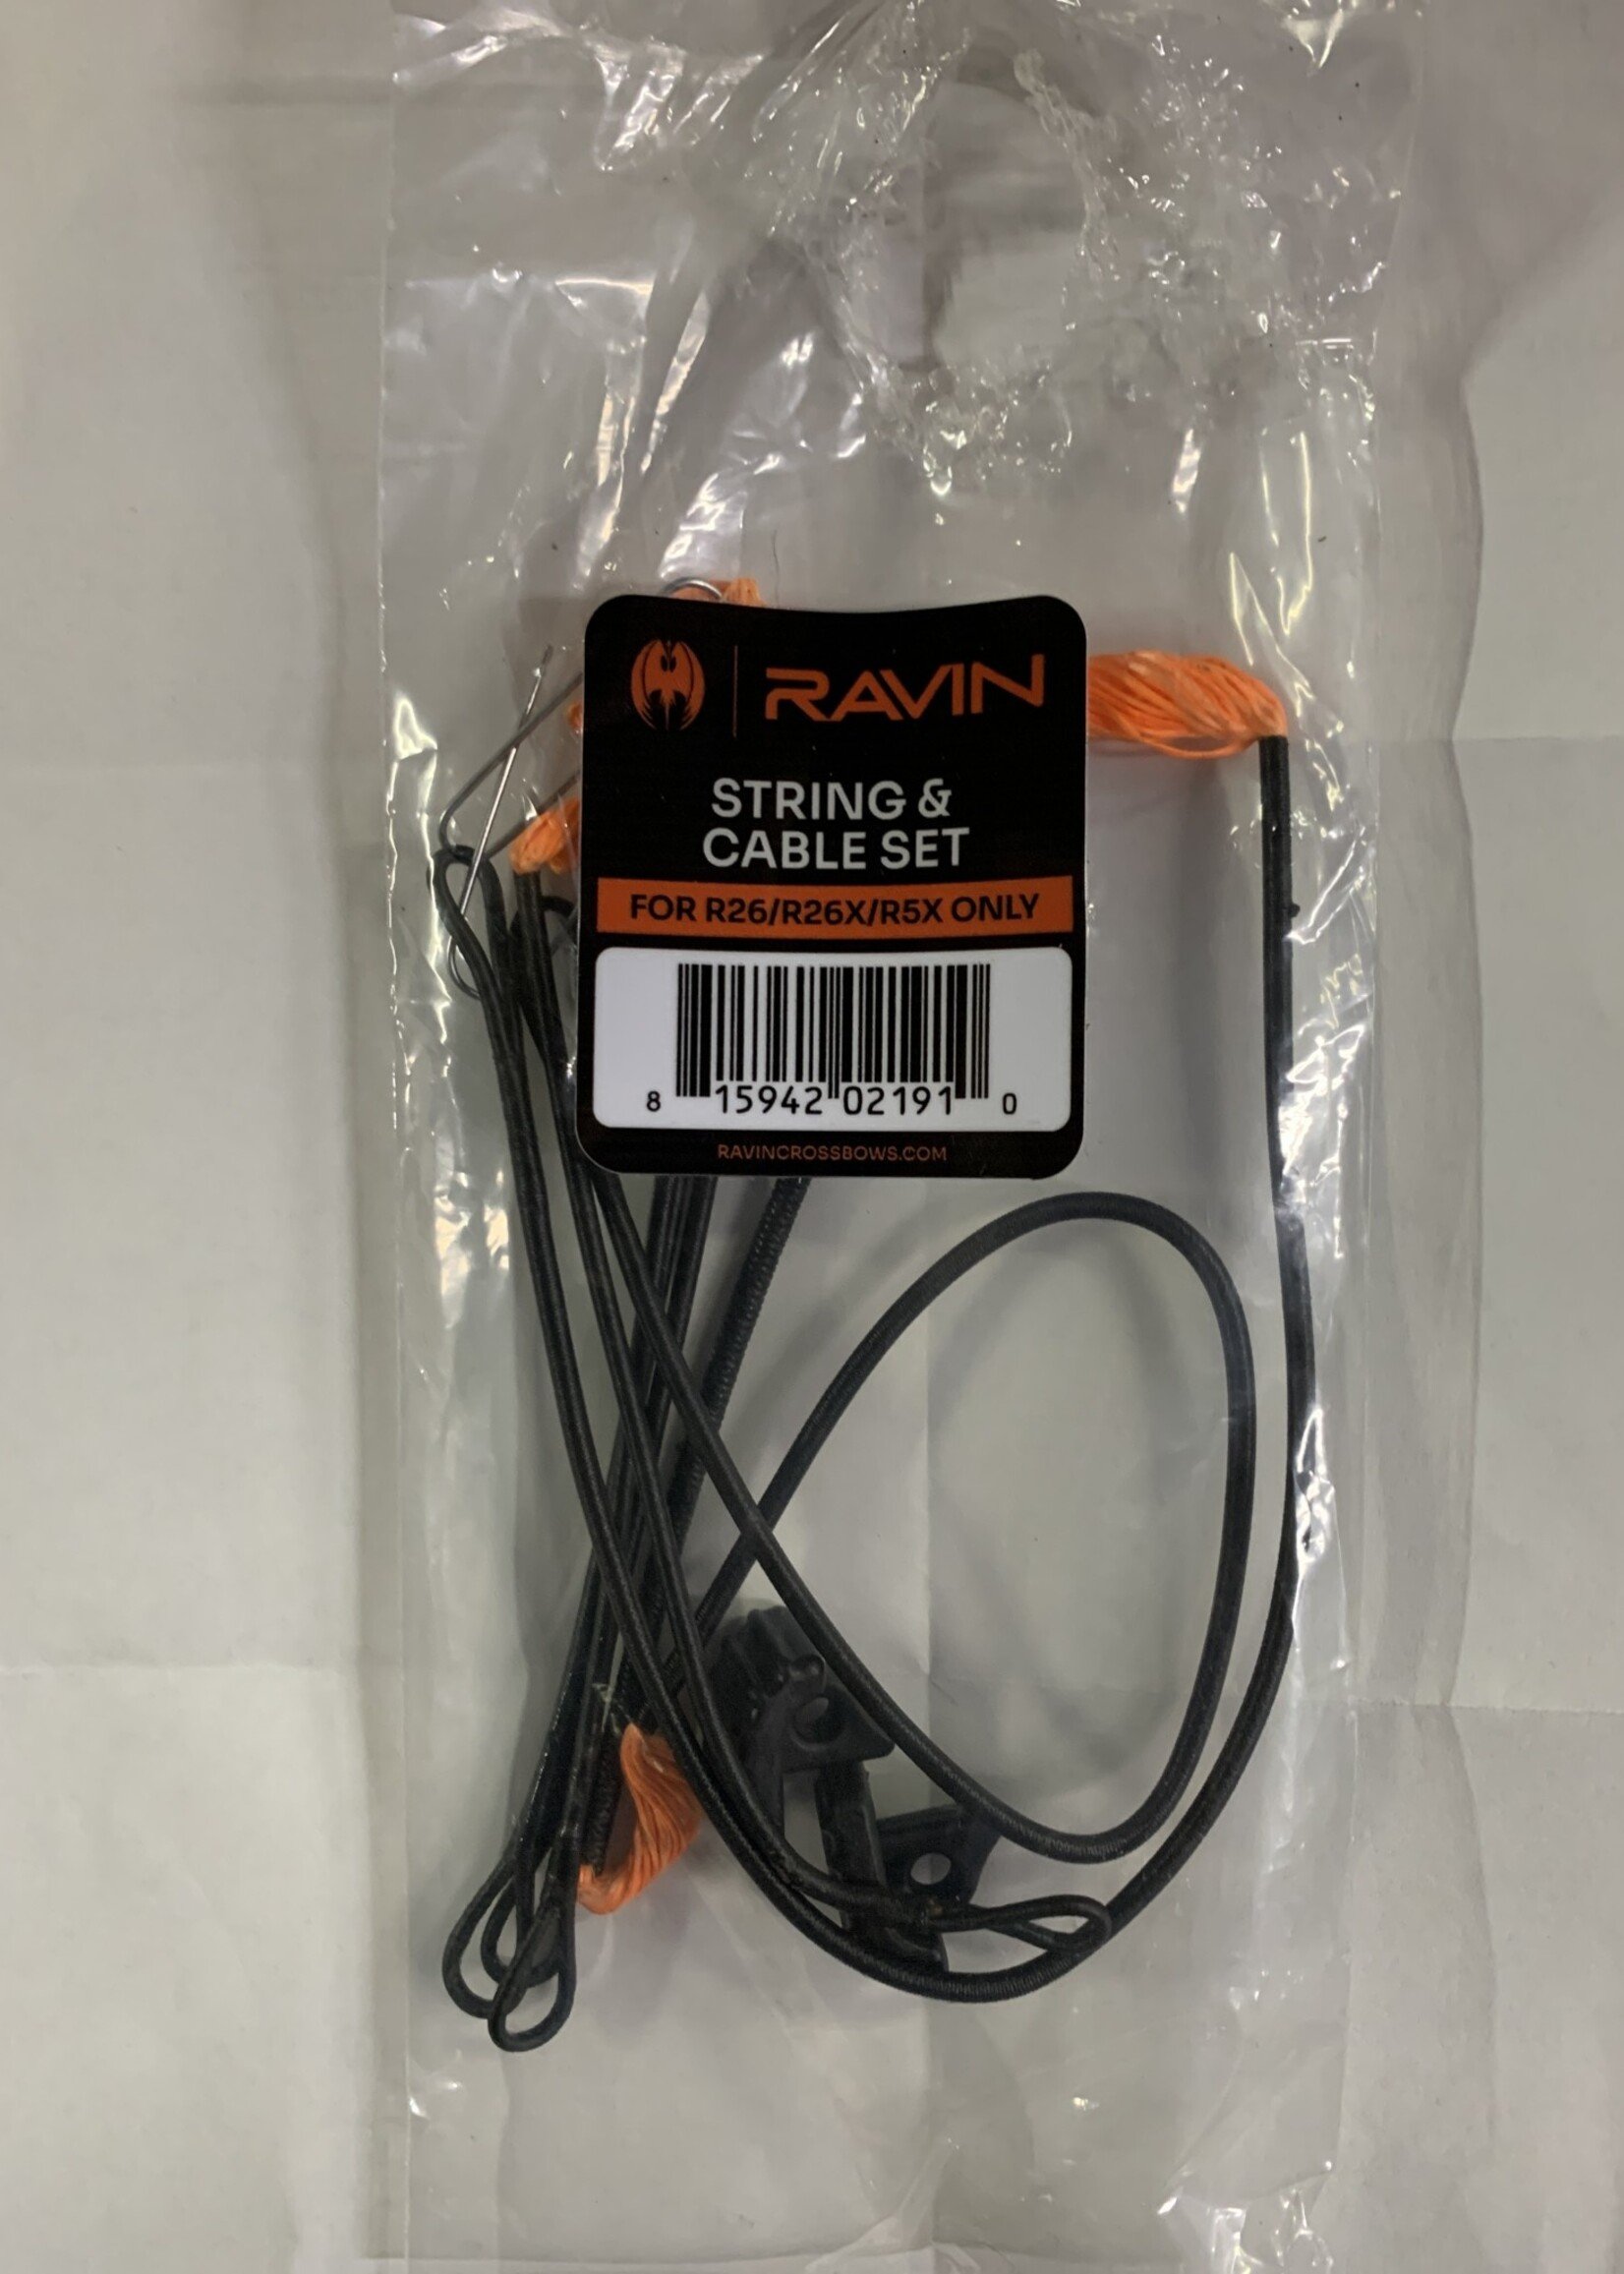 RAVIN Ravin String & Cable Set R26/R26X/R5X Only